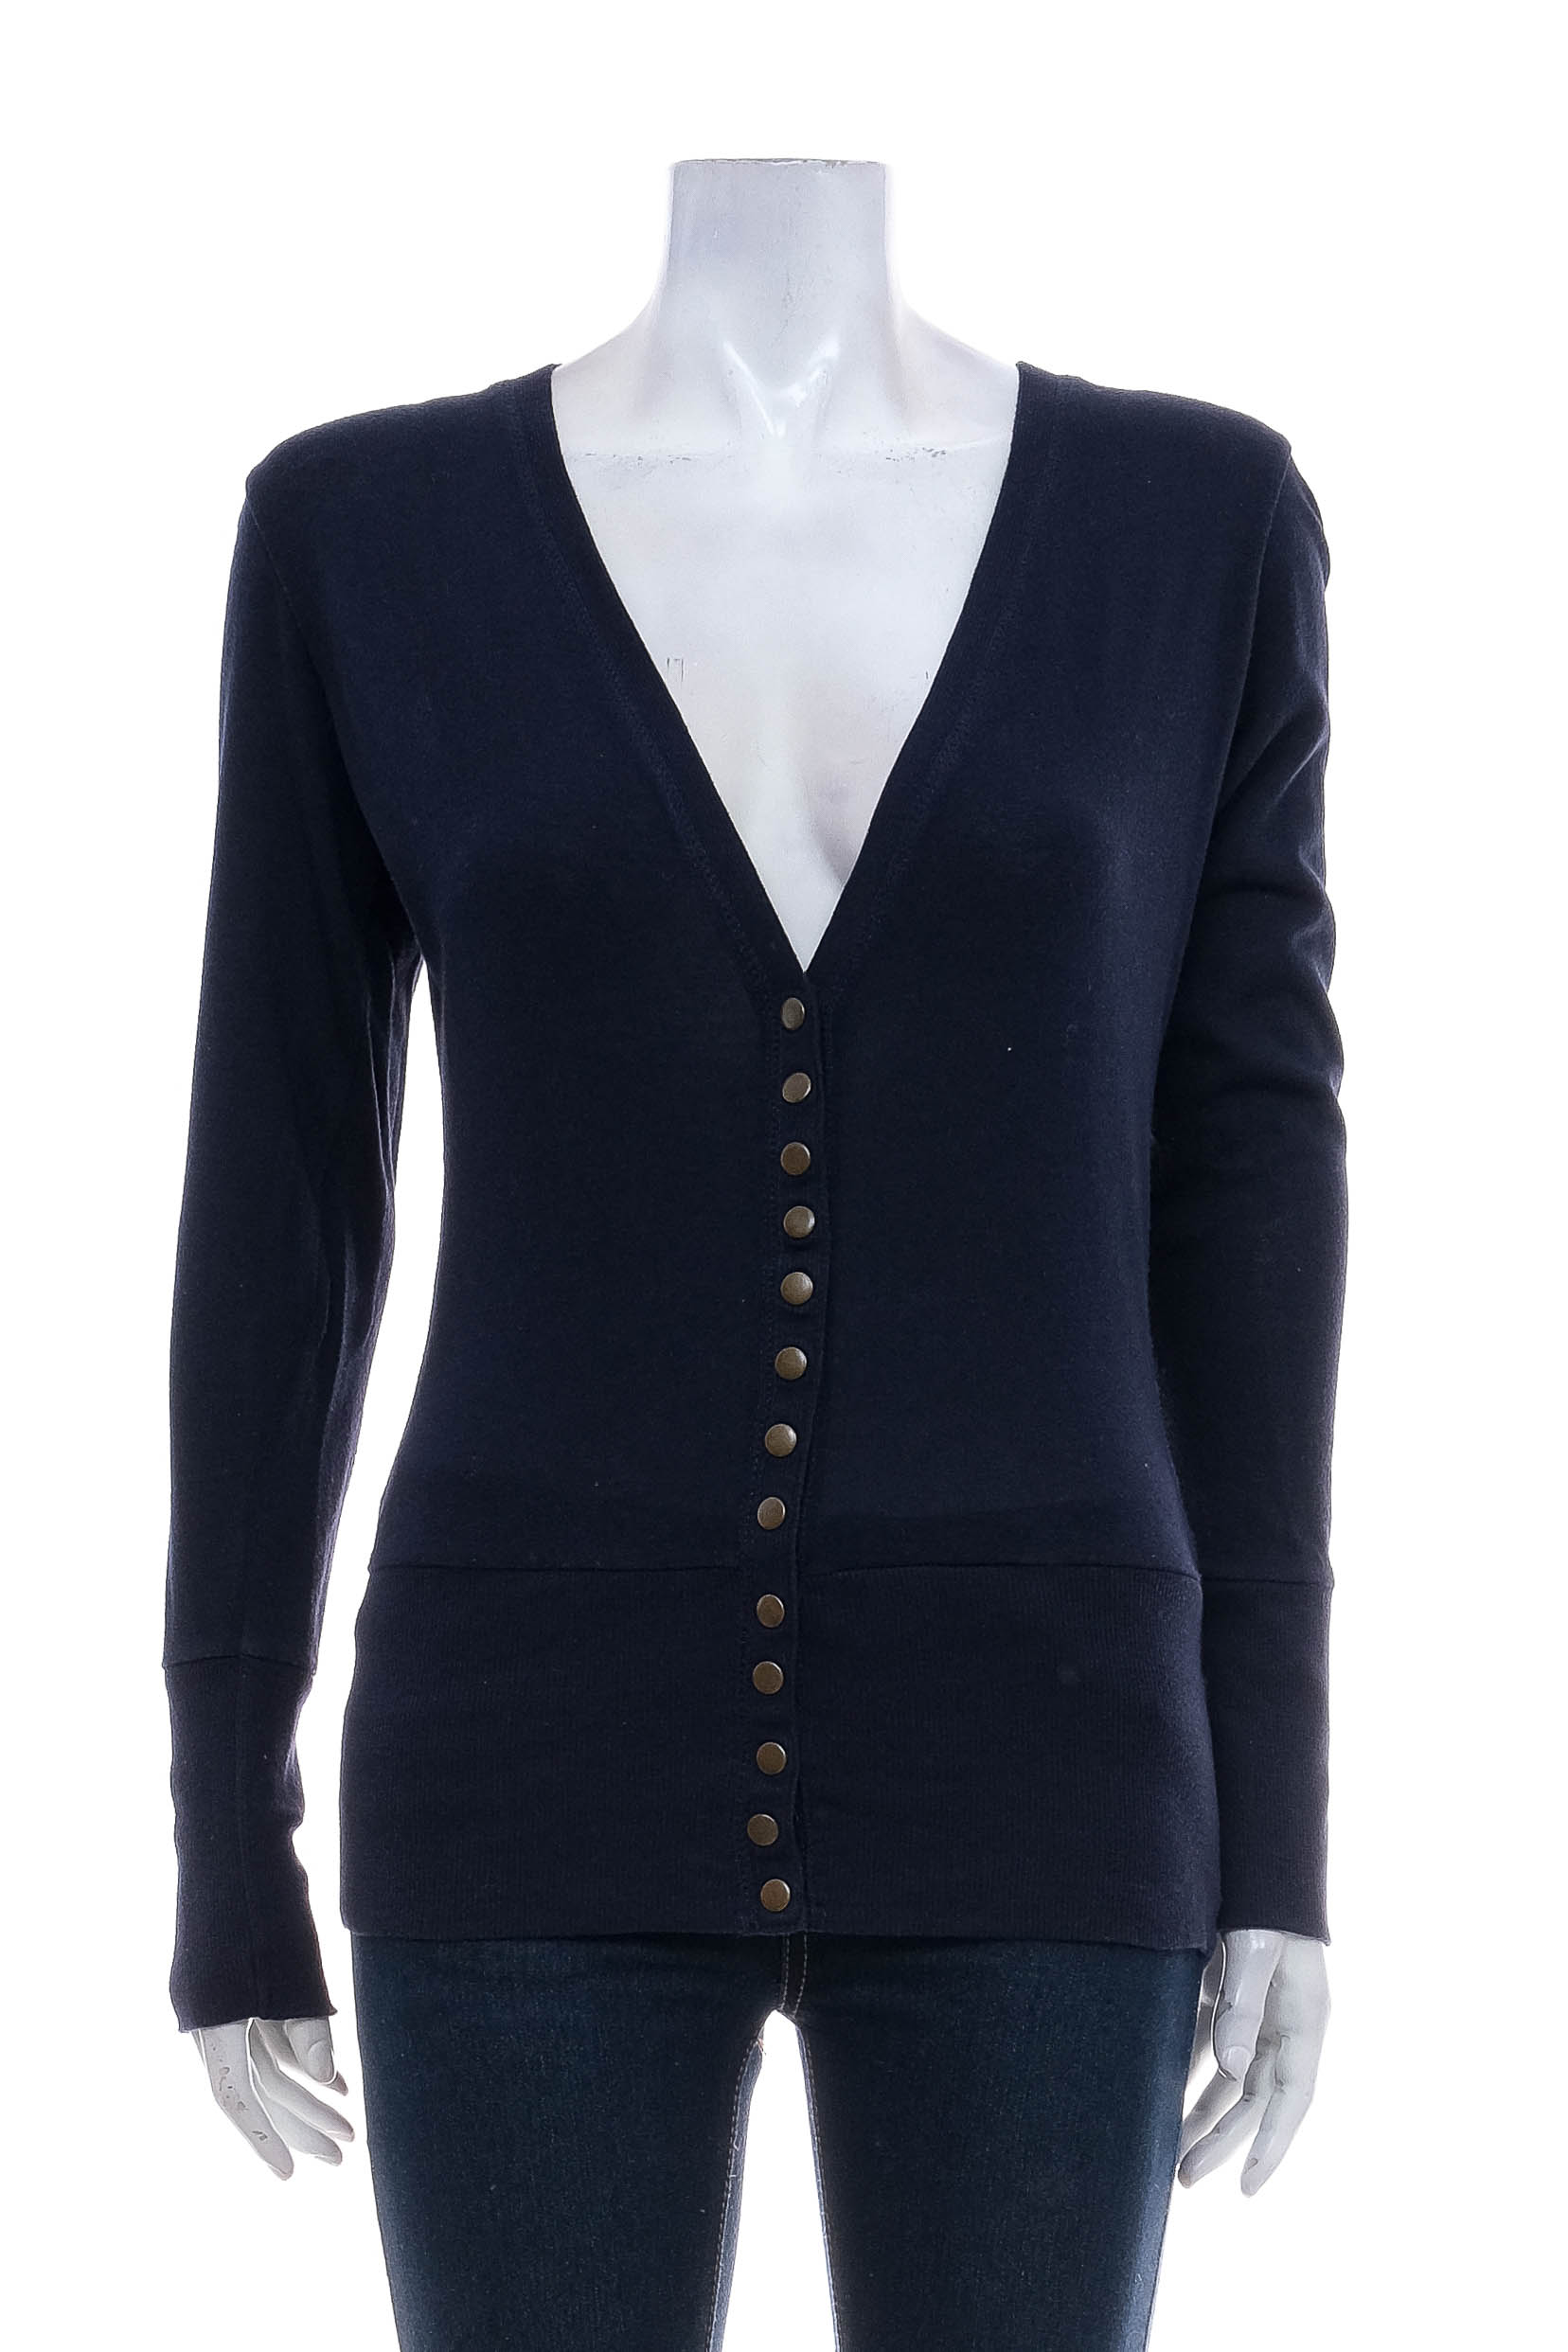 Women's cardigan - COLOR STORY - 0